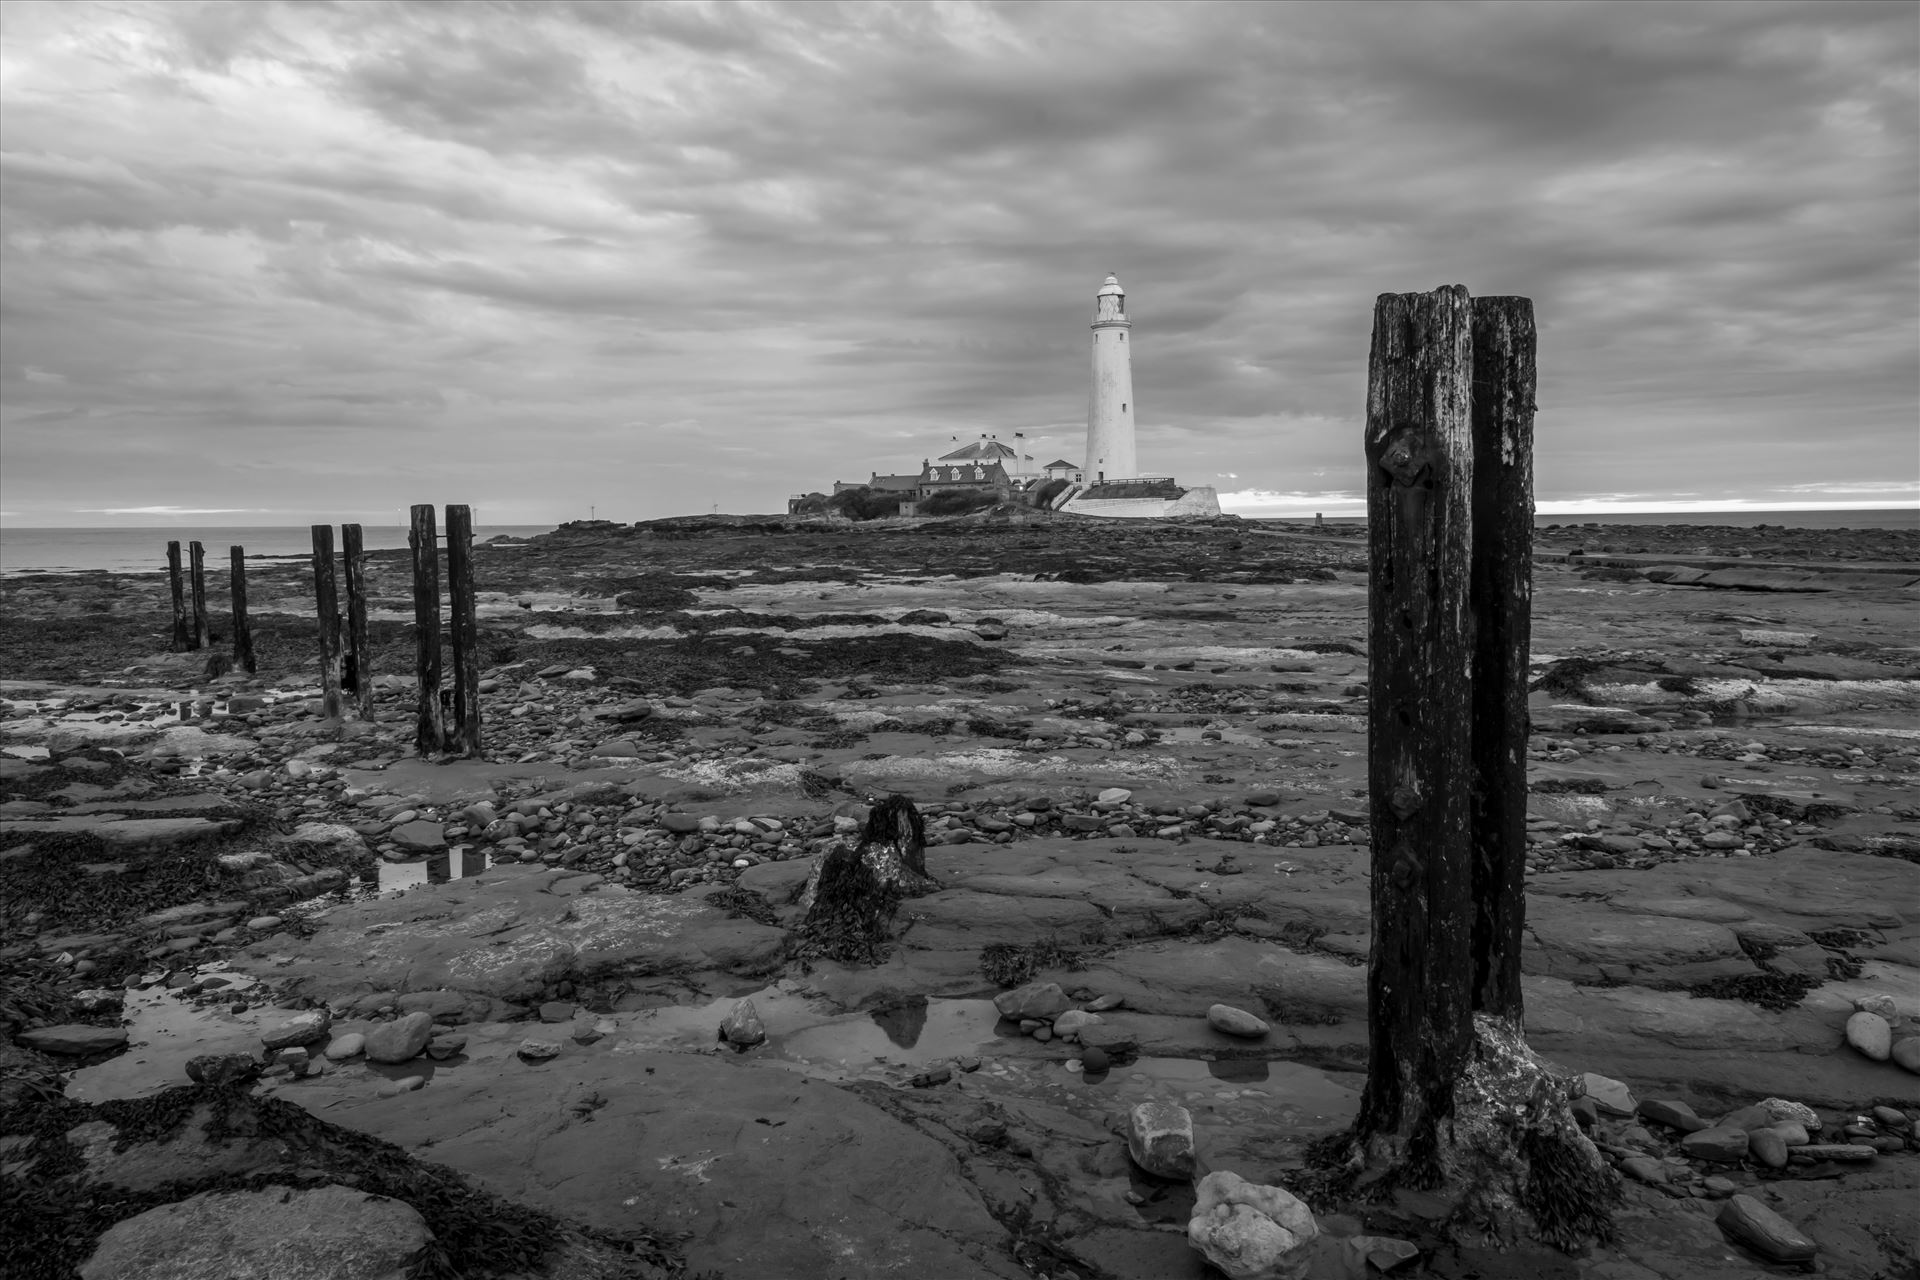 St Mary`s Island & lighthouse - St Mary`s lighthouse stands on a small rocky tidal island is linked to the mainland by a short concrete causeway which is submerged at high tide. The lighthouse was built in 1898 & was decommissioned in 1984, 2 years after becoming automatic. by philreay